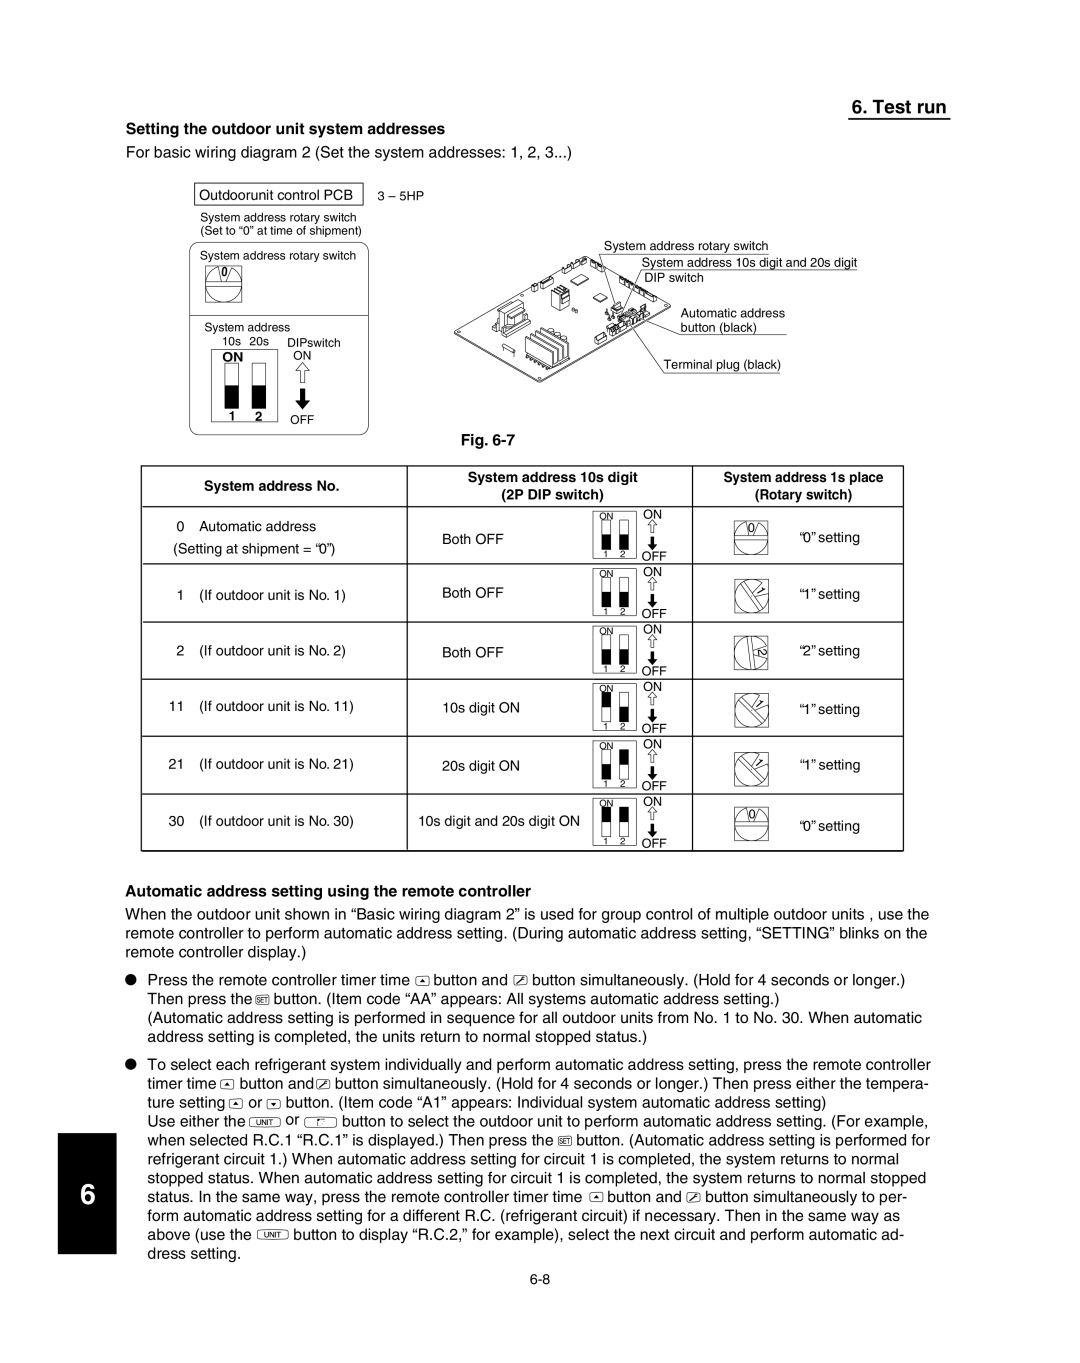 Panasonic R410A service manual Test run, Setting the outdoor unit system addresses, Fig 